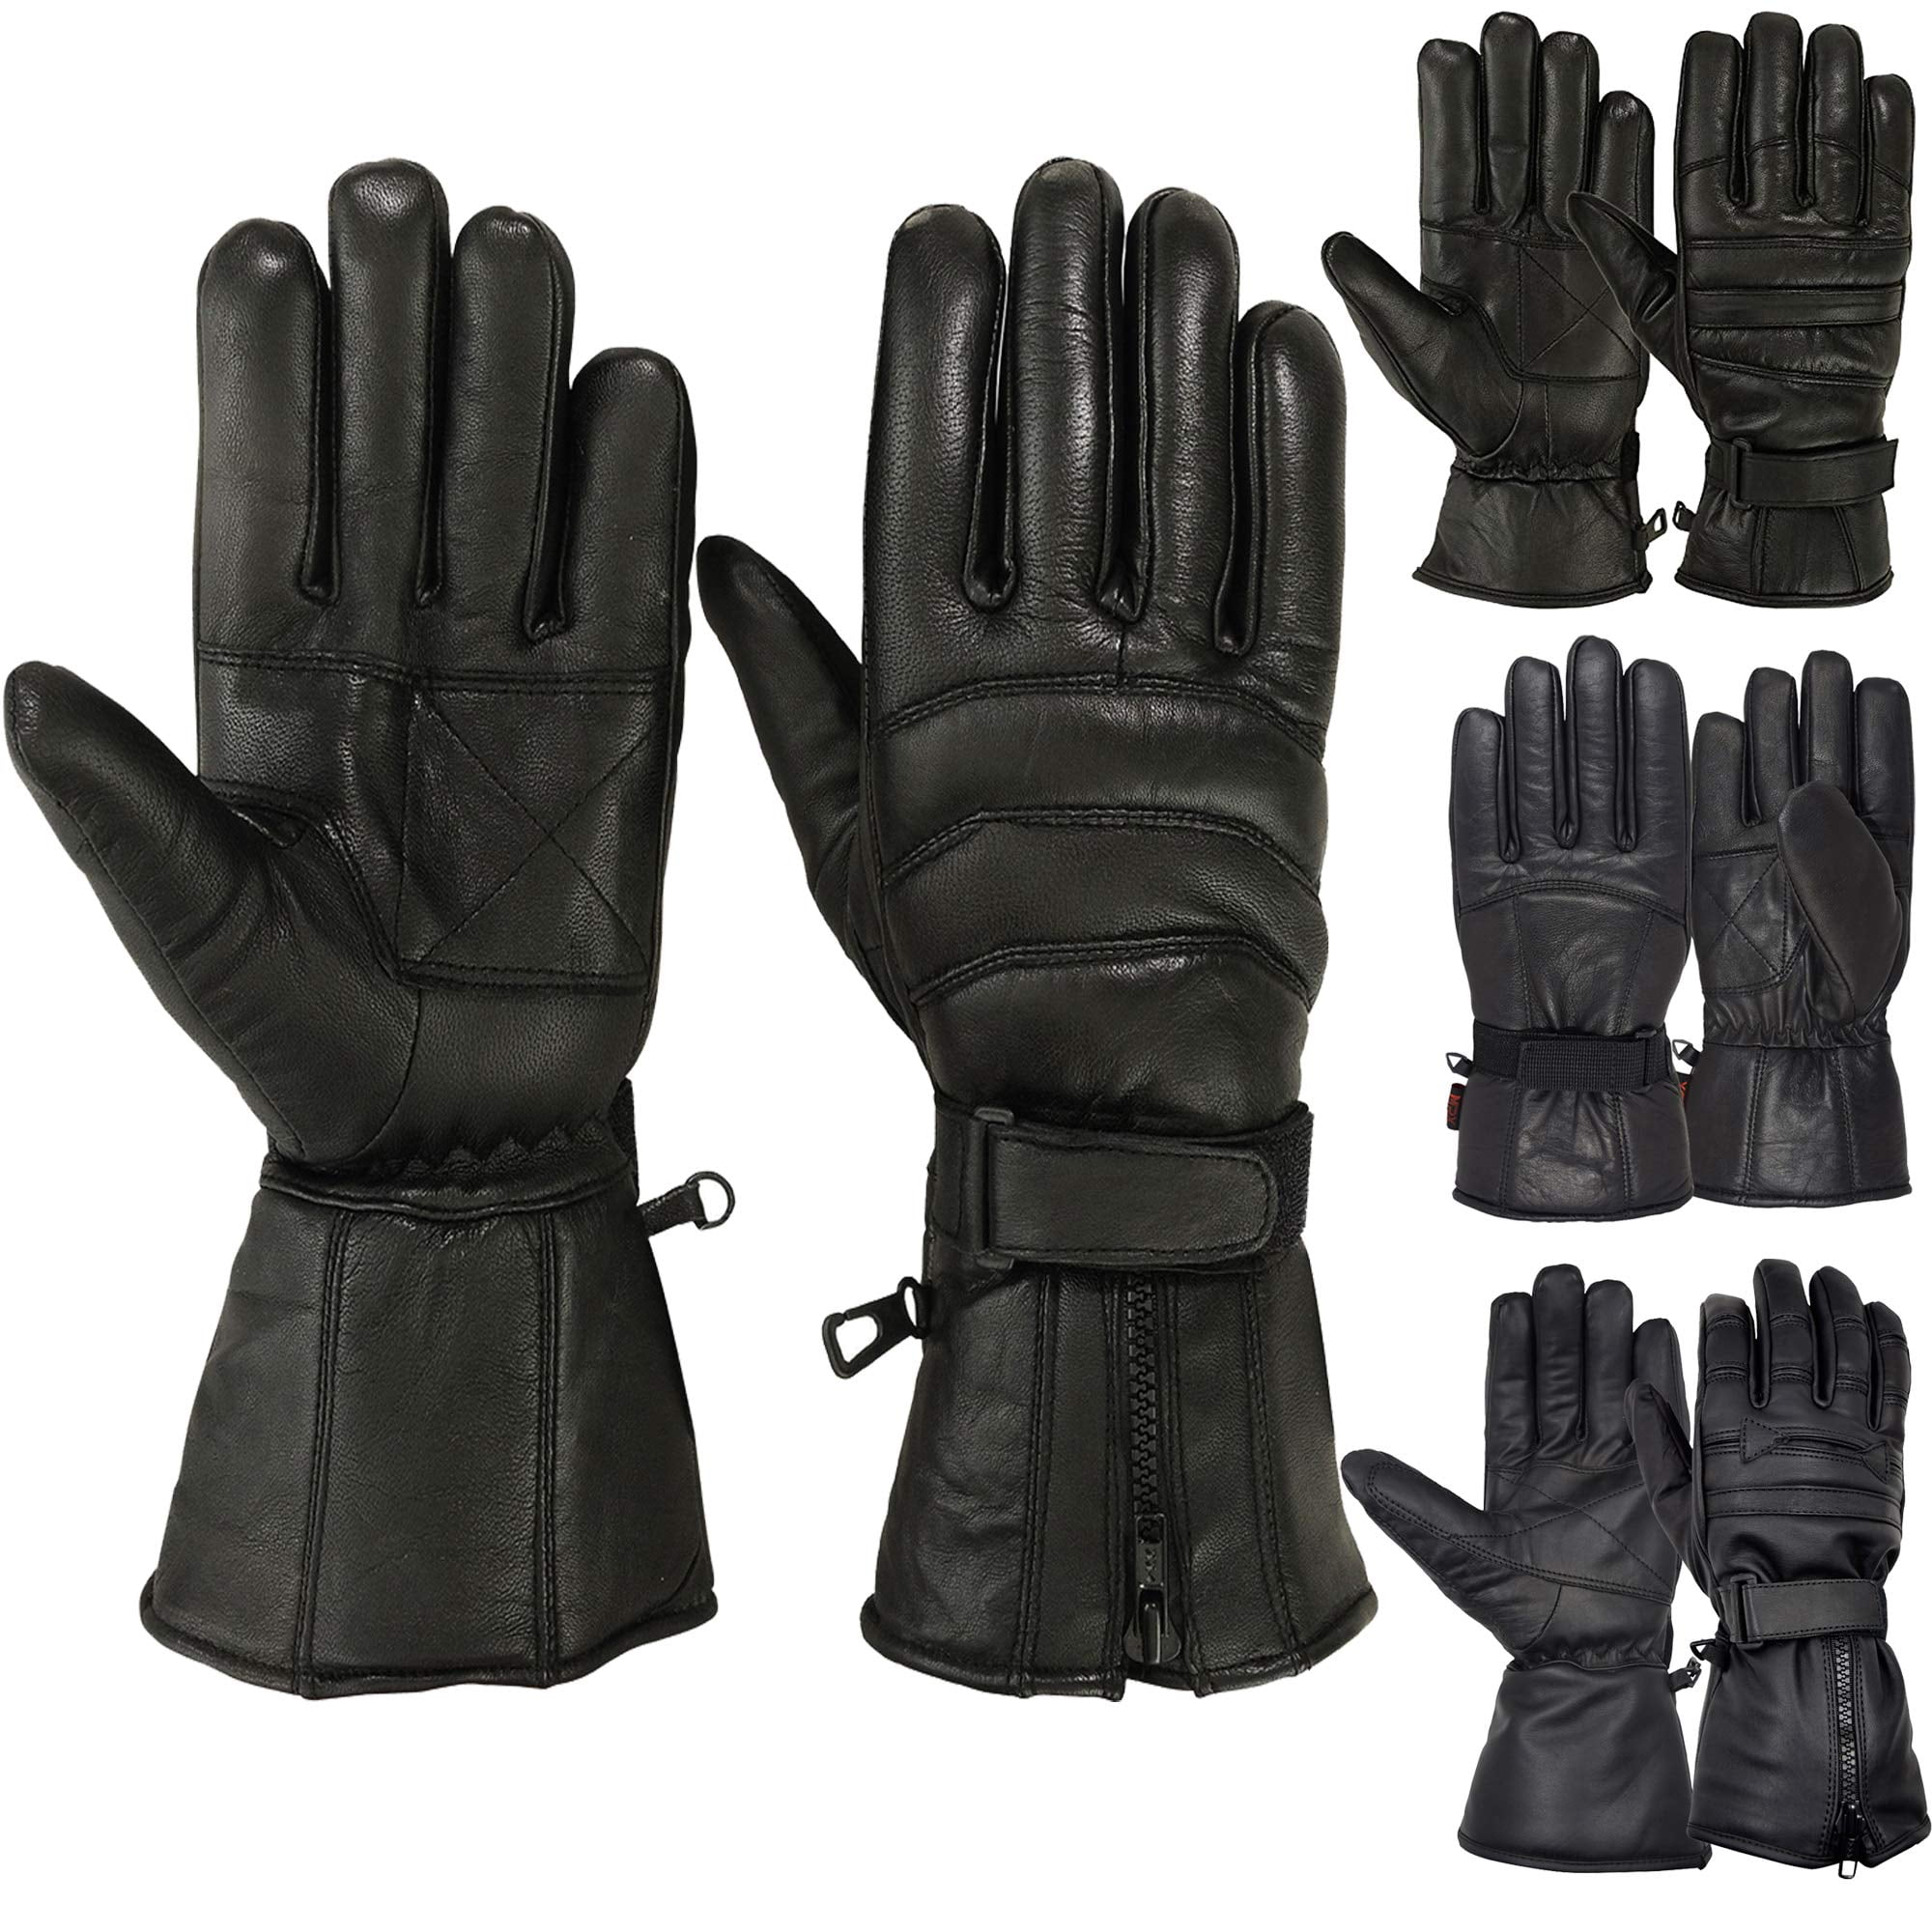 Leather gloves Brand New Motorbike Motorcycle Driving Black Winter gloves 